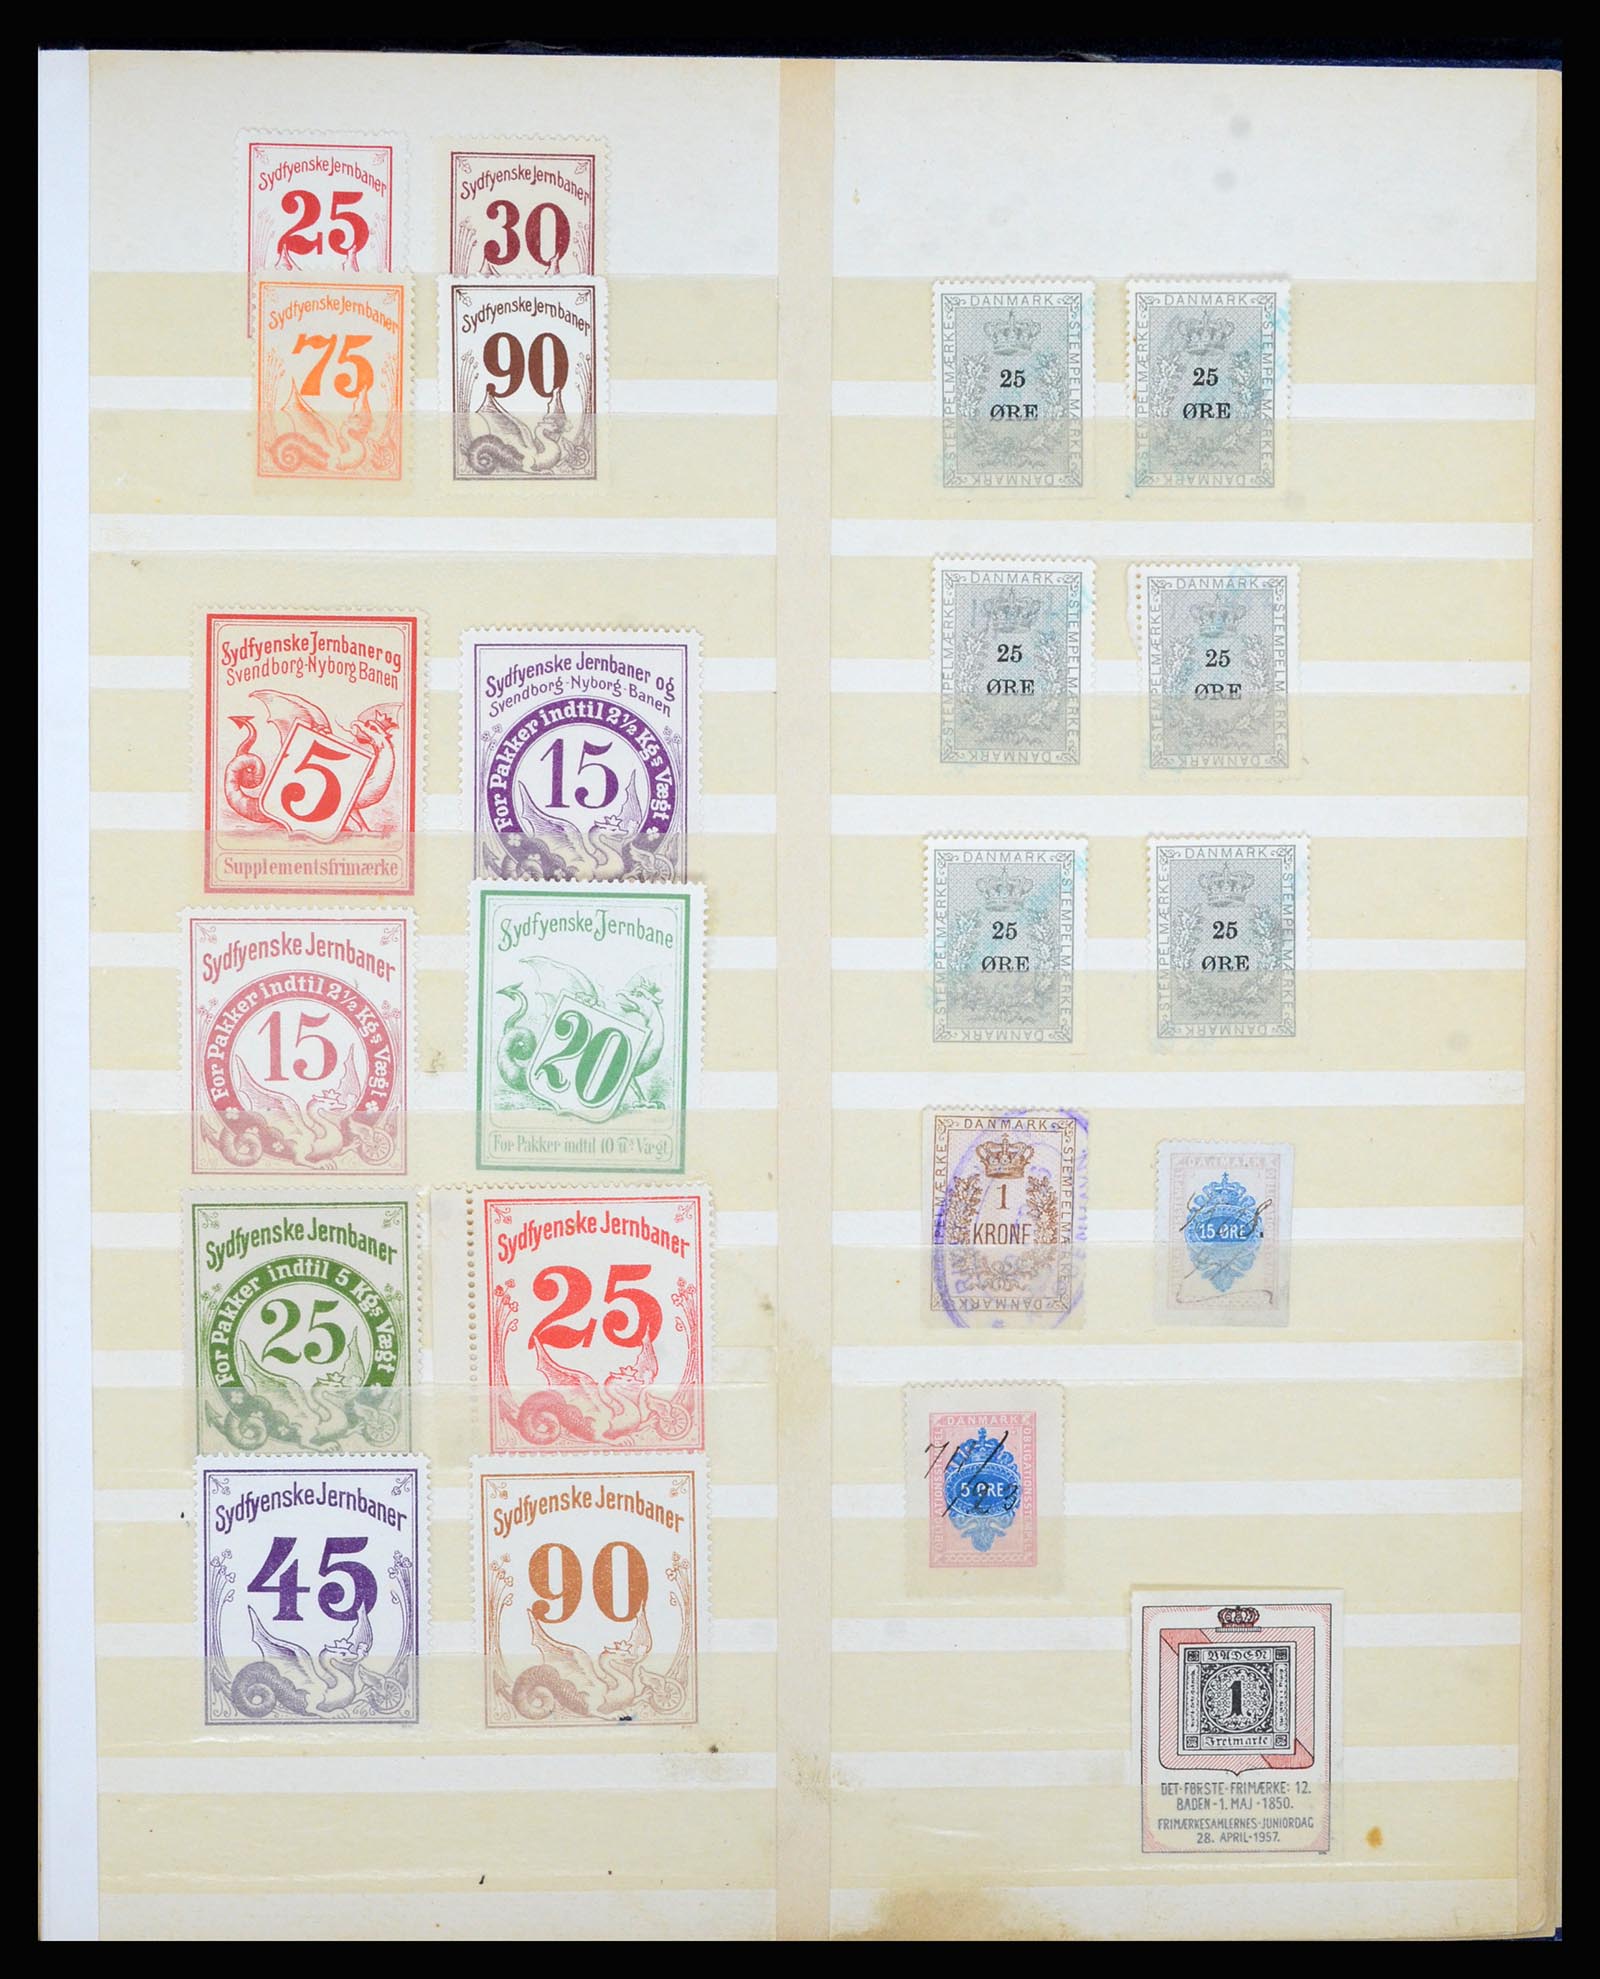 36767 019 - Stamp collection 36767 Denmark railroadstamps.